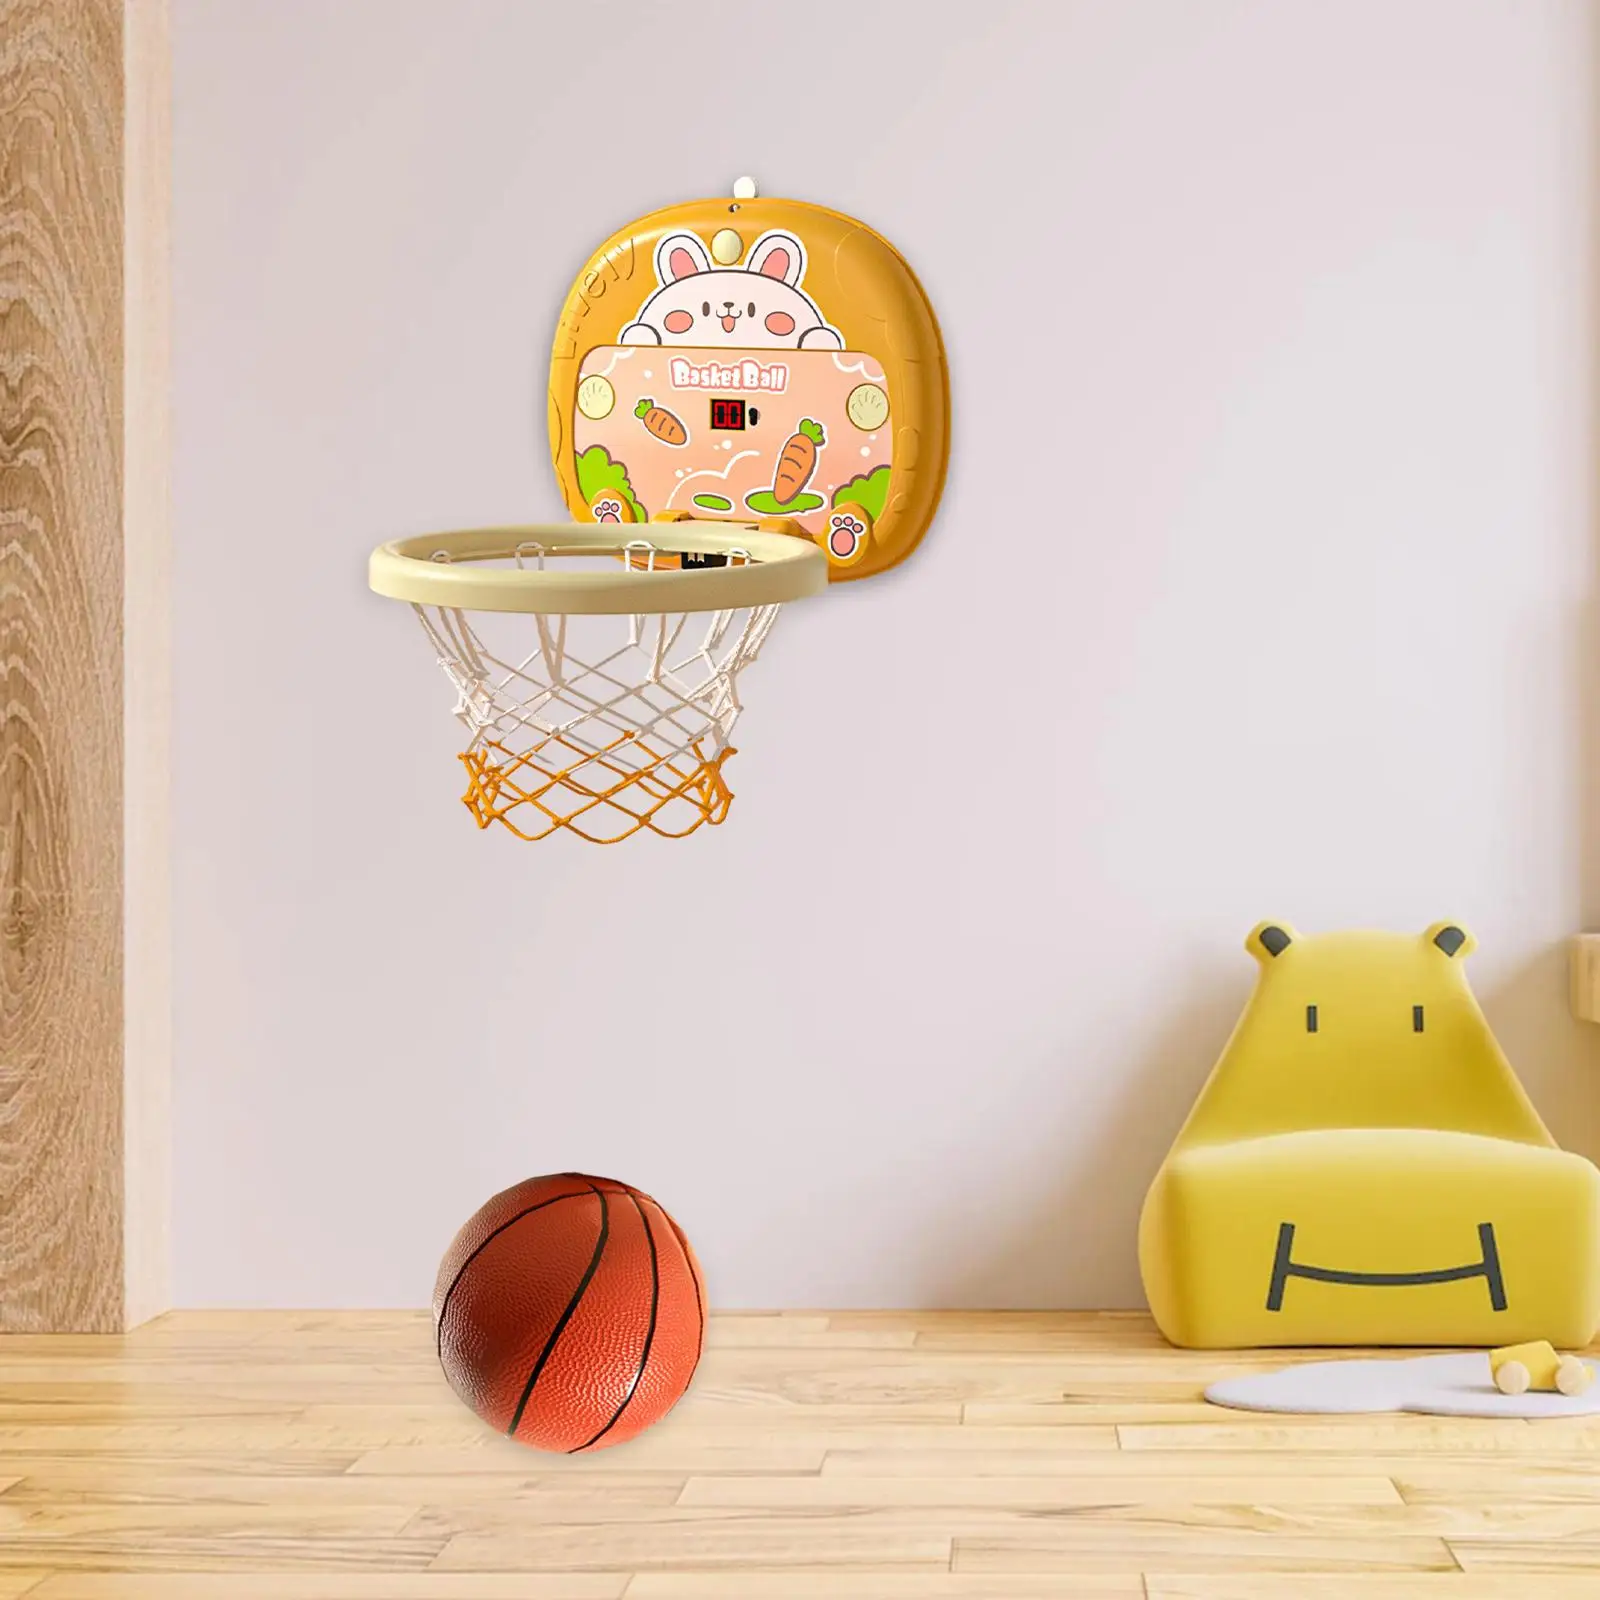 Mini Basketball Hoop Set Portable Indoor Game Set for Home Office Kids Gifts